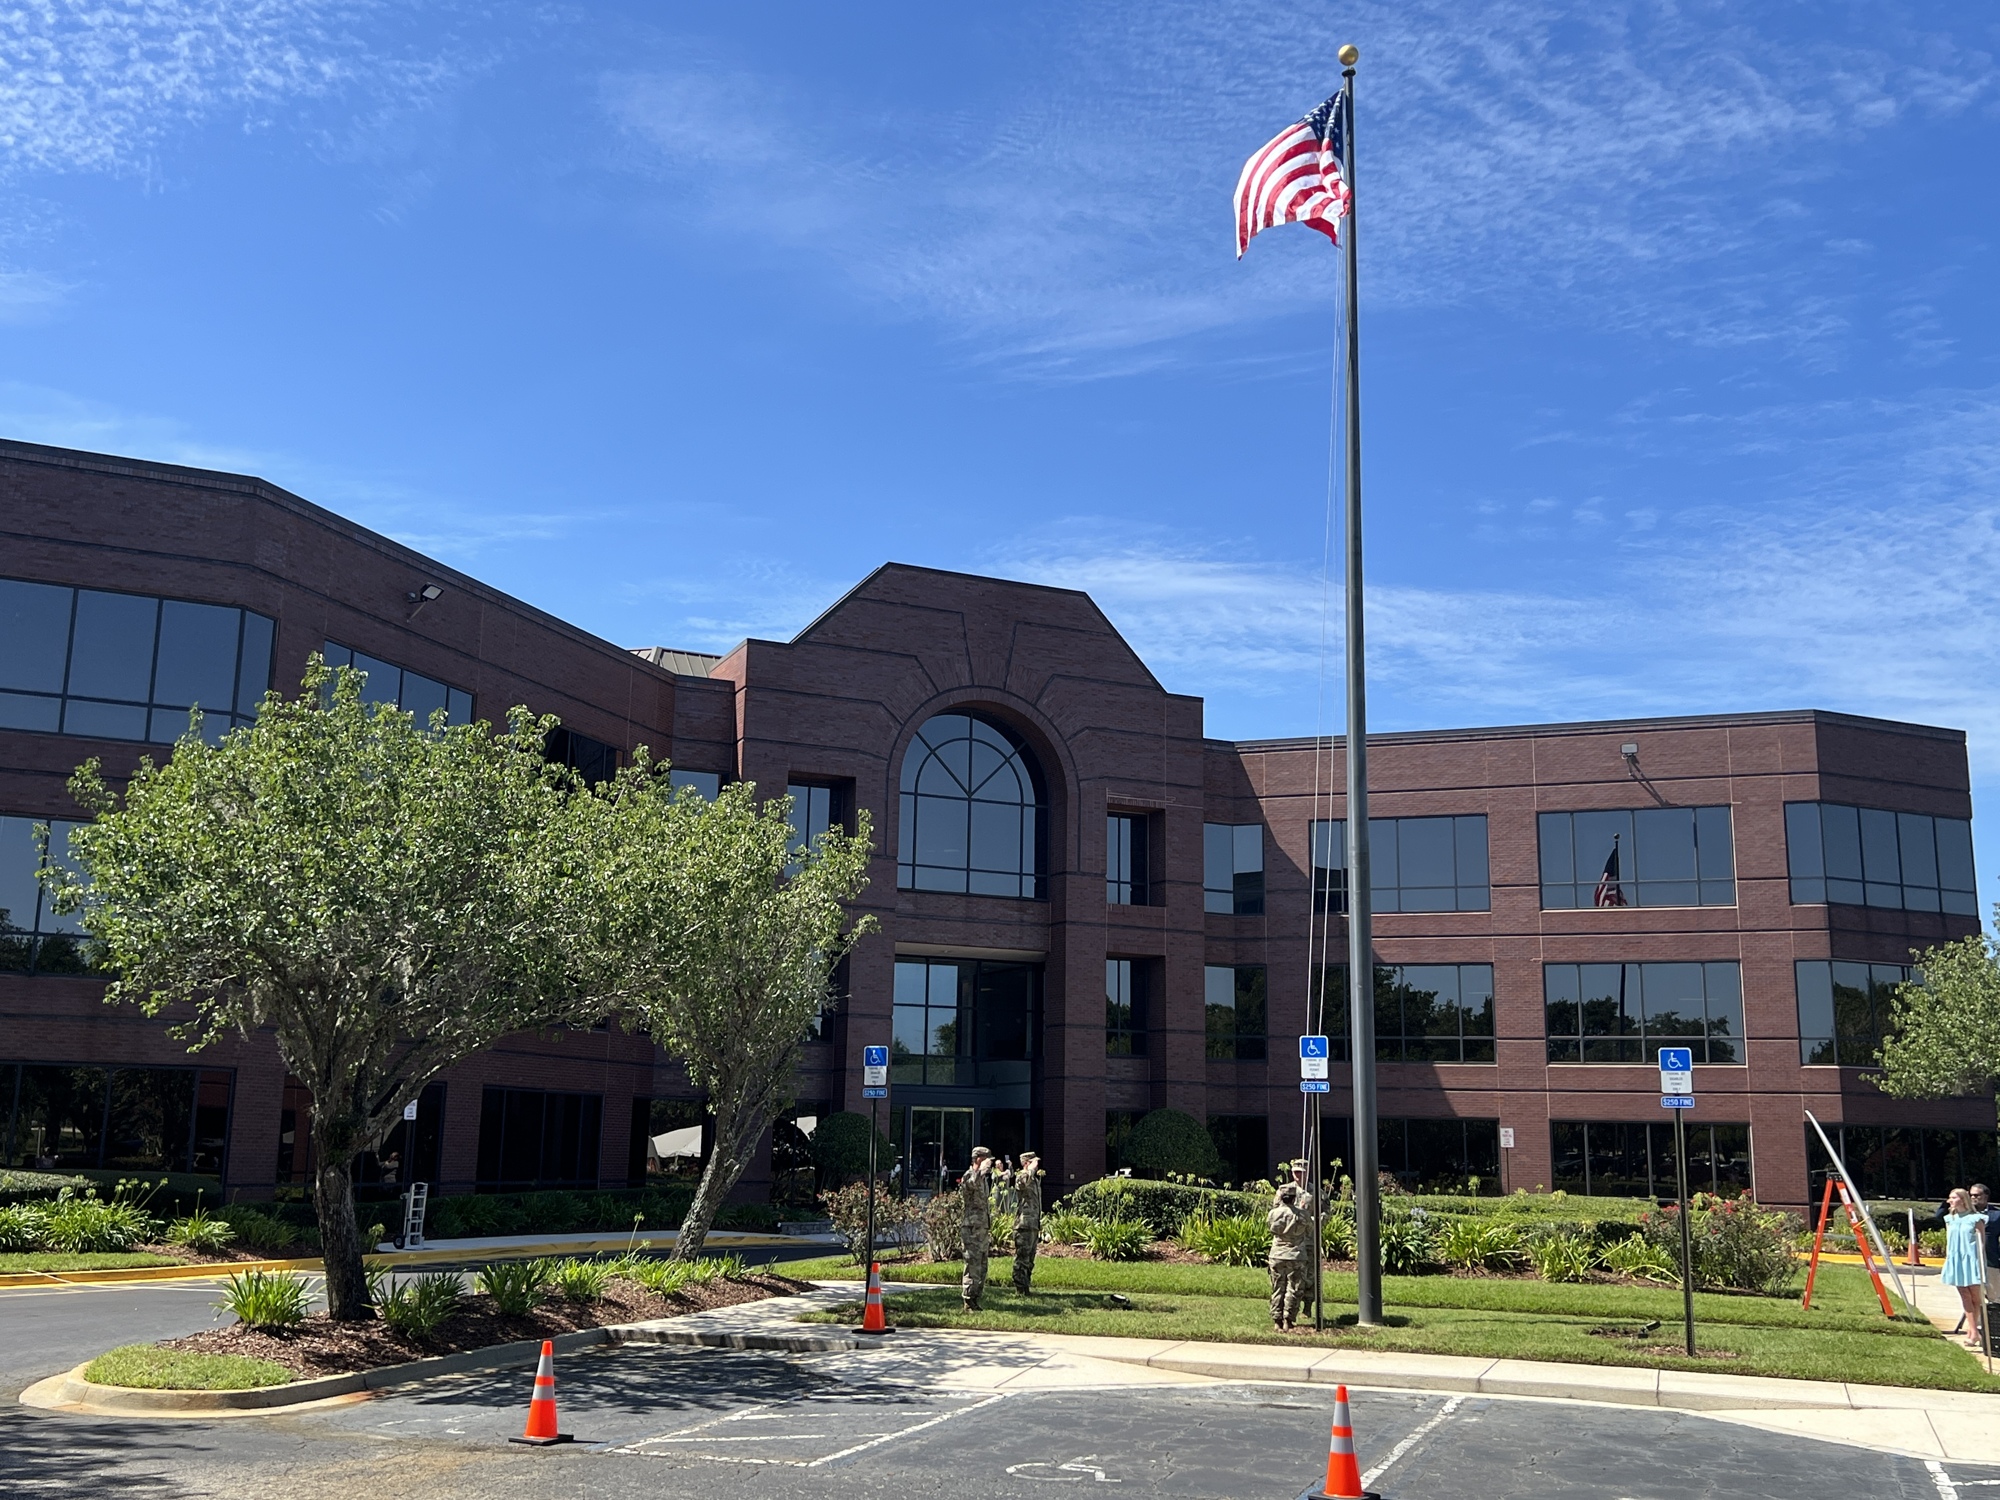 In addition to the RISE headquarters, the developer is leasing space to Kindred at Home, Ameriprise Financial Services - Huntley & Gonzalez, Equis Financial, Digital Edge Marketing and Gannett Fleming.